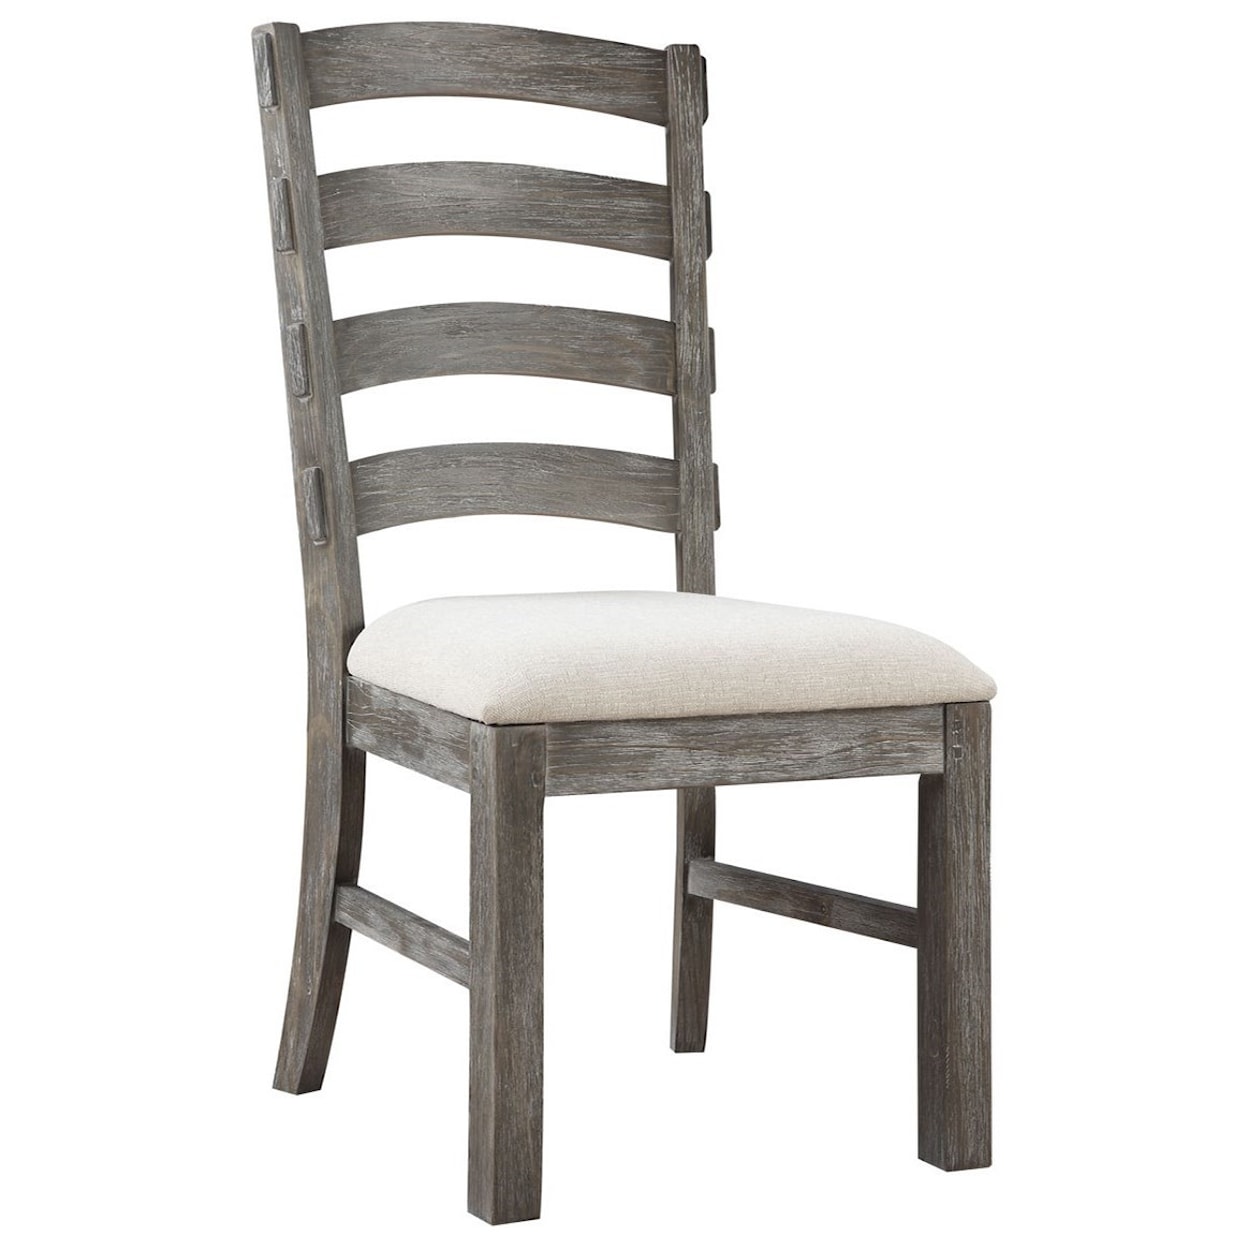 Emerald Paladin Slat Back Side Chair with Upholstered Seat